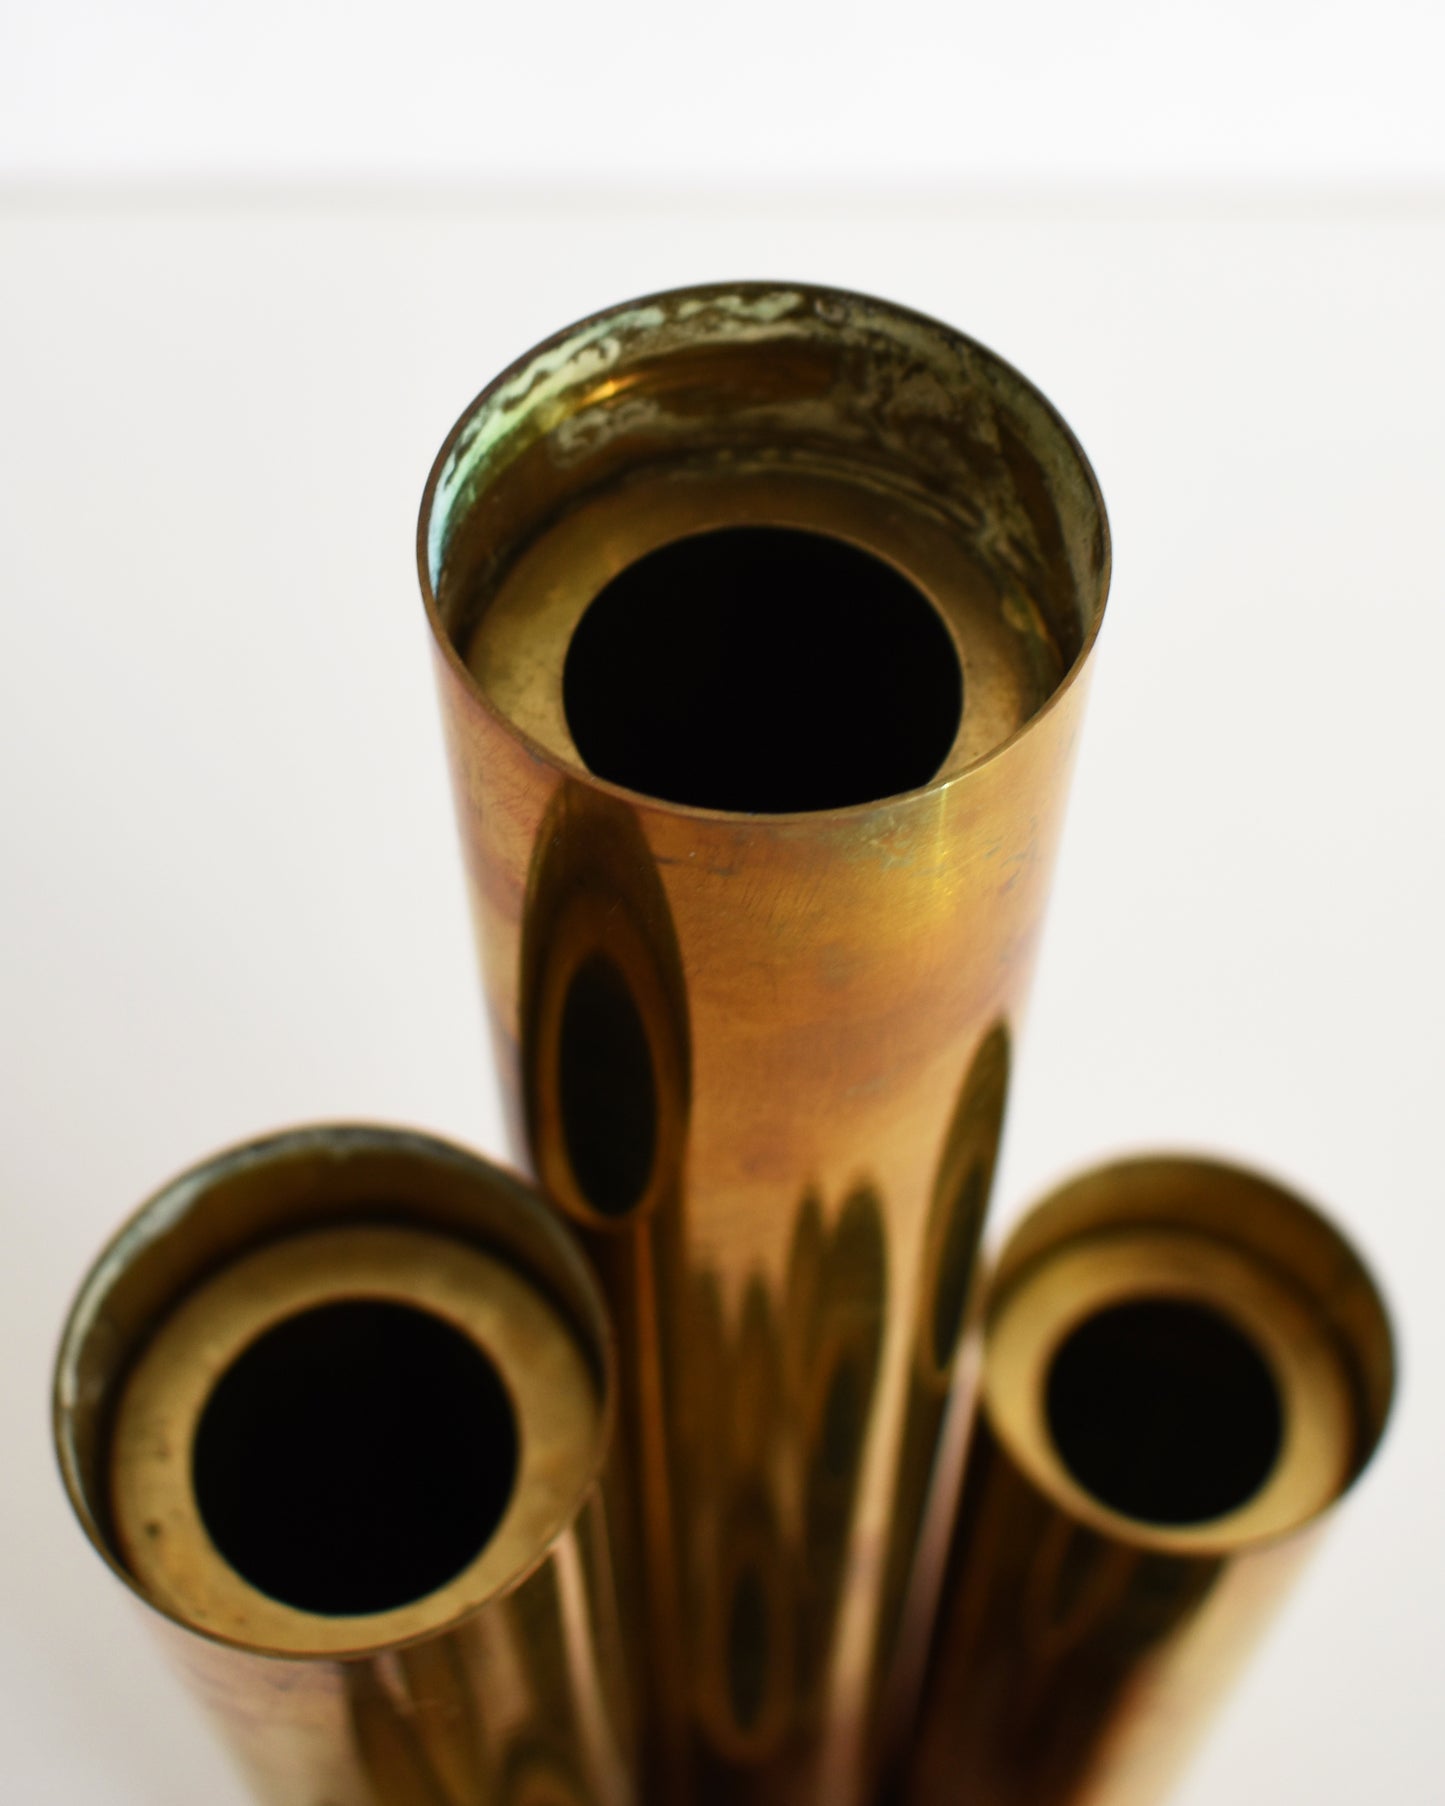 Close up of the tallest candlestick with the insert out, showing the hollow center